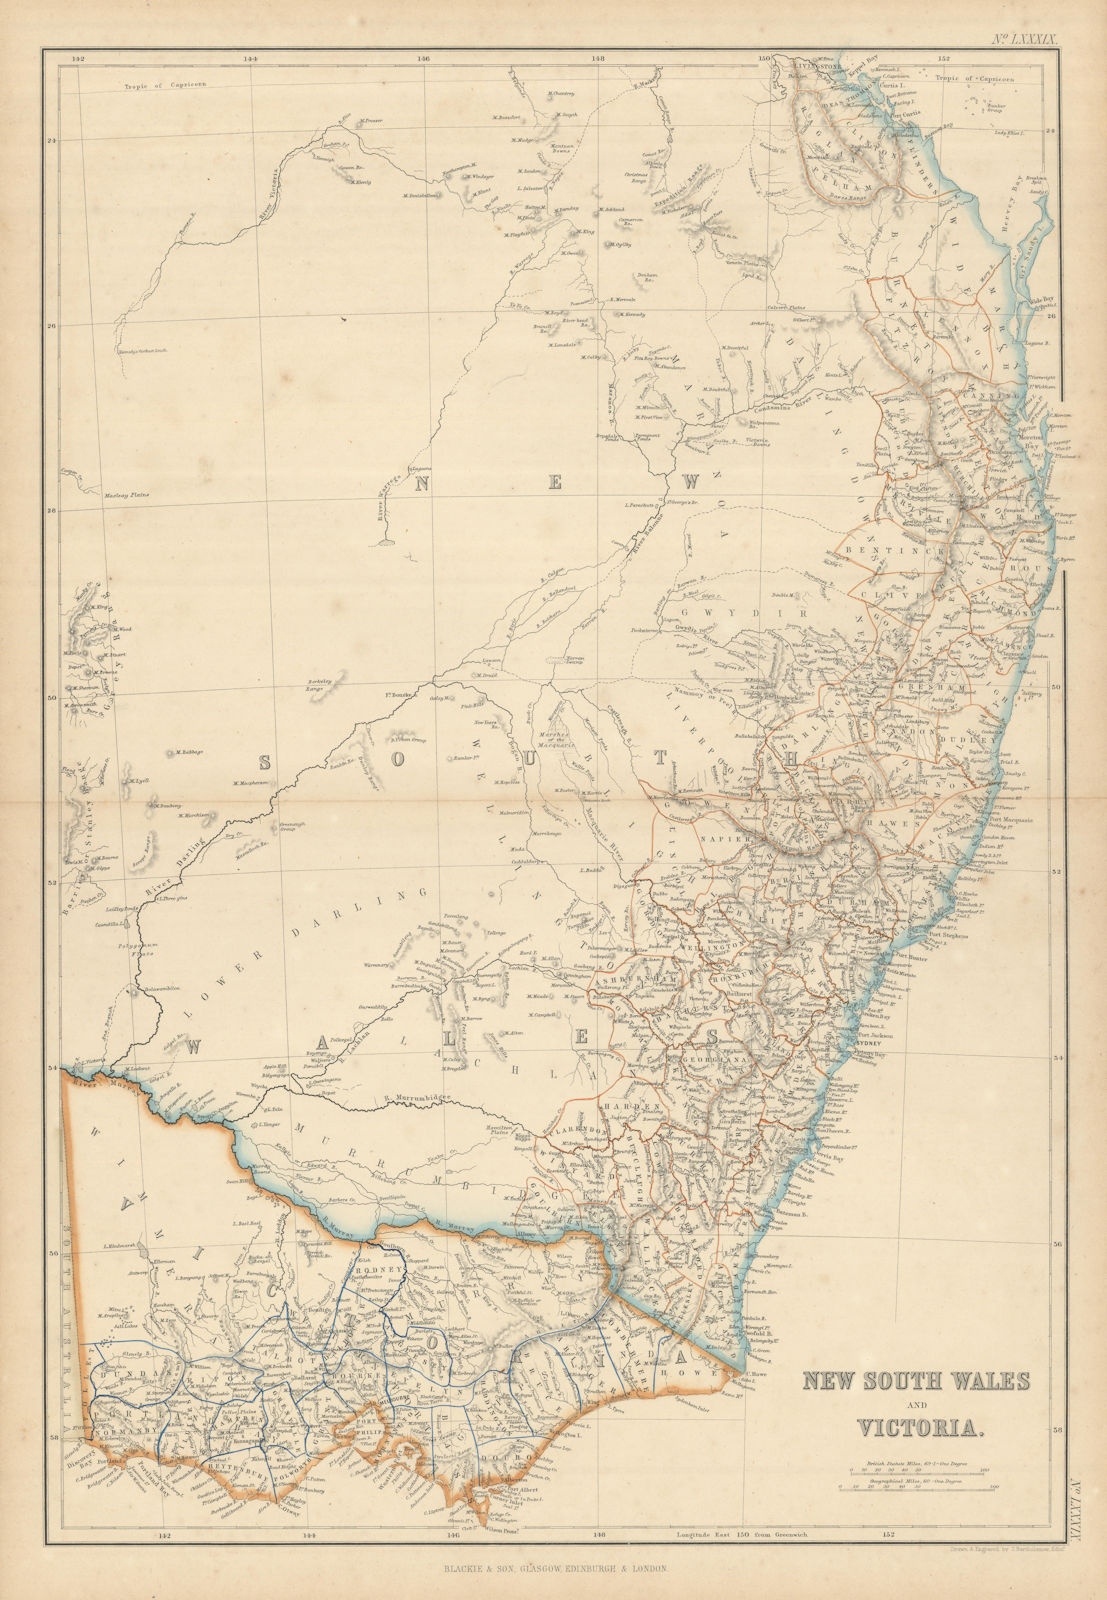 Queen's Land, New South Wales and Victoria. Queensland. BARTHOLOMEW 1860 map